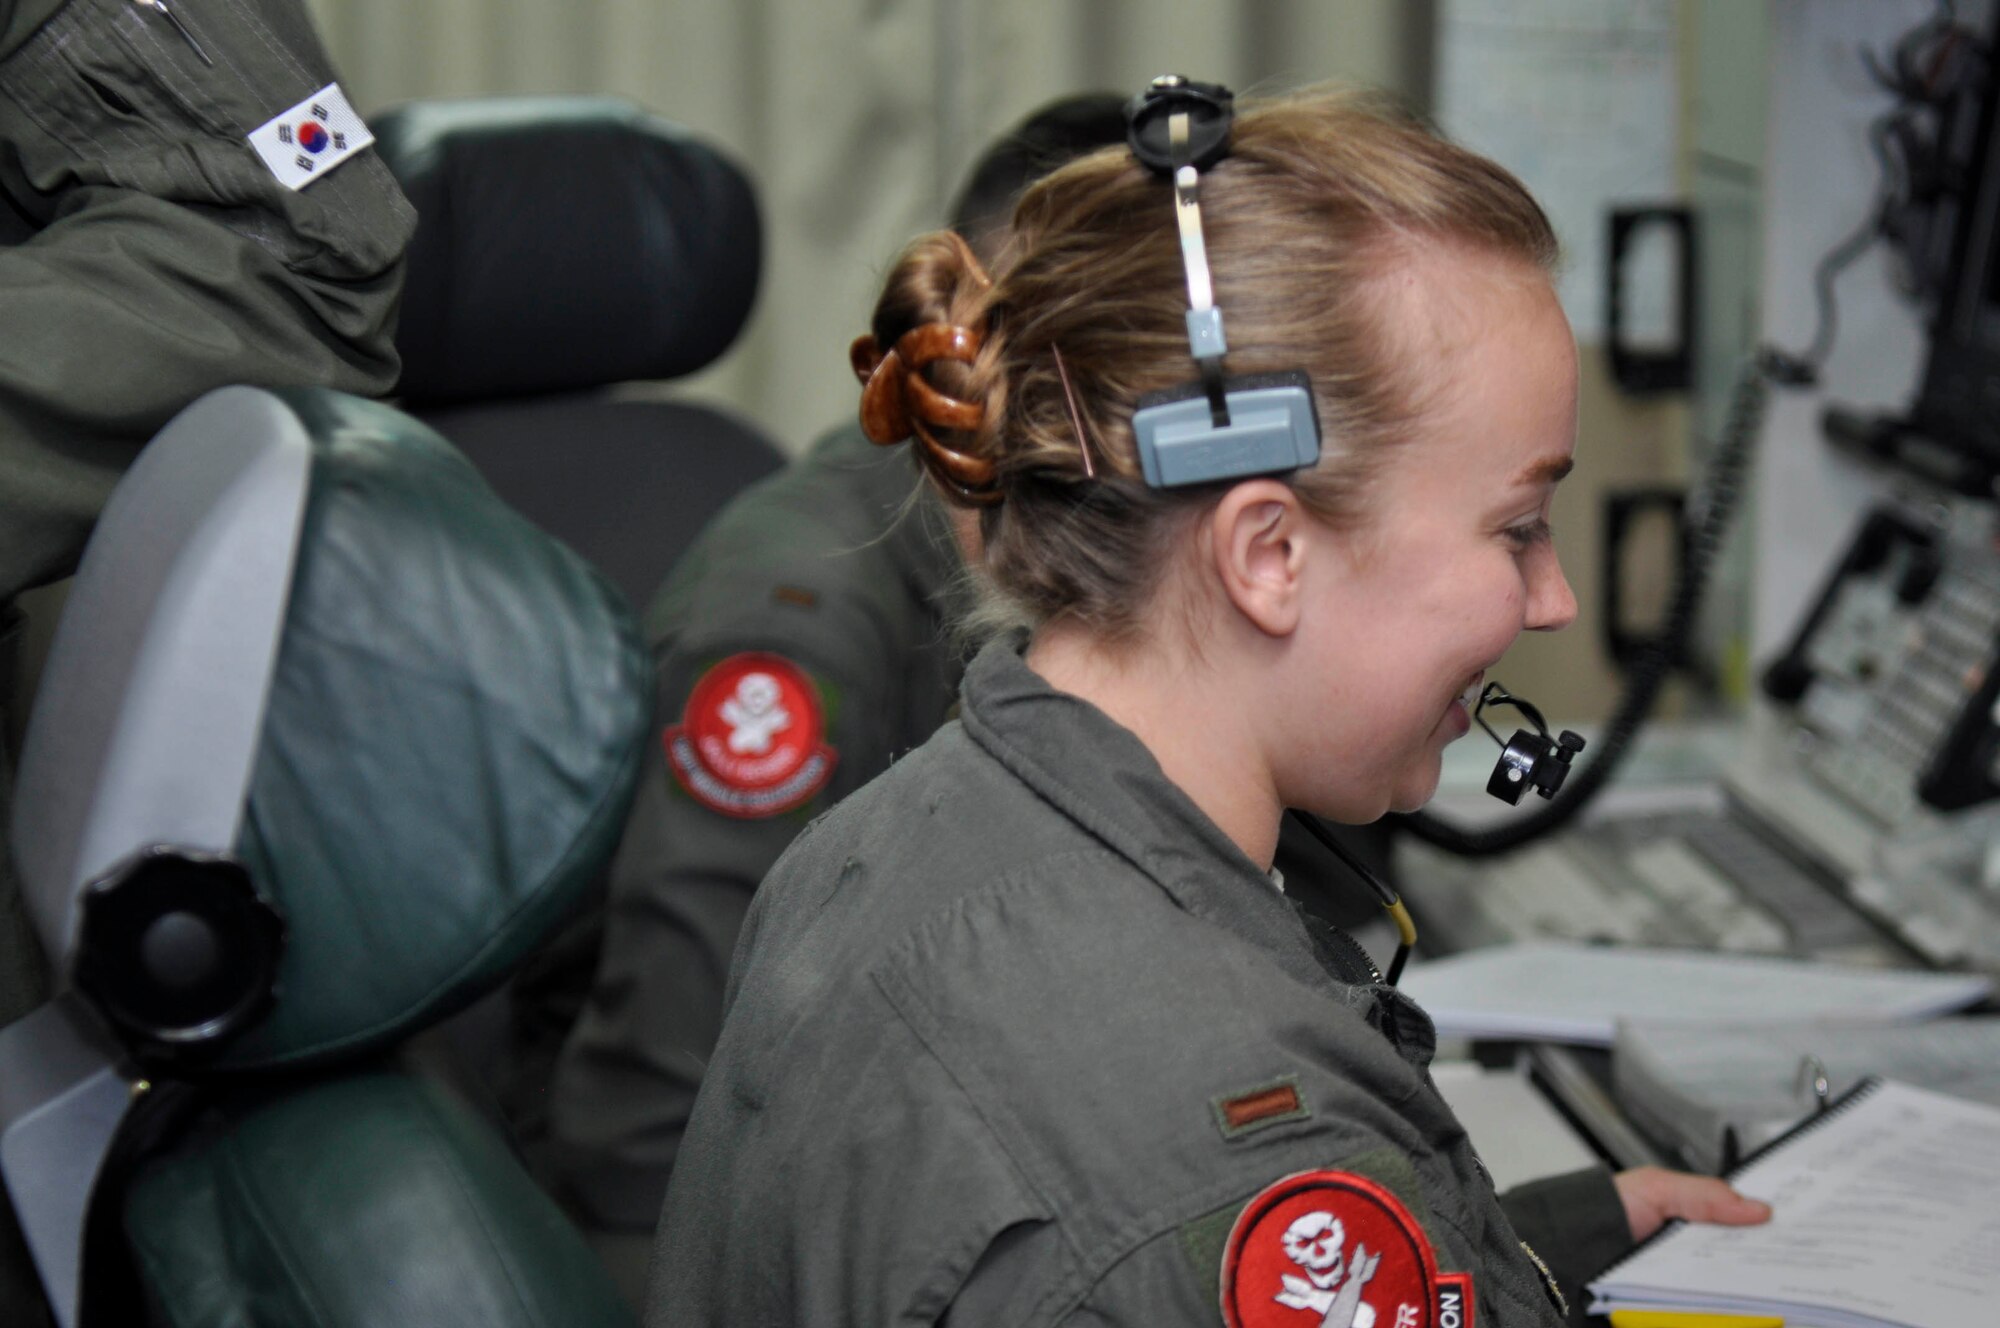 Second Lieutenant Teah Heidorn, 320th Missile Squadron deputy combat crew commander, speaks through her headset to evaluators during a Simulated Electronic Launch-Minuteman test inside a launch control center at a missile alert facility in the 90th Missile Wing missile complex, Aug. 21, 2018. Accomplishing the SELM validates these claims and increases the deterrent capability of the Minuteman III ICBM weapon system. (U.S. Air Force photo by Senior Airman Breanna Carter)